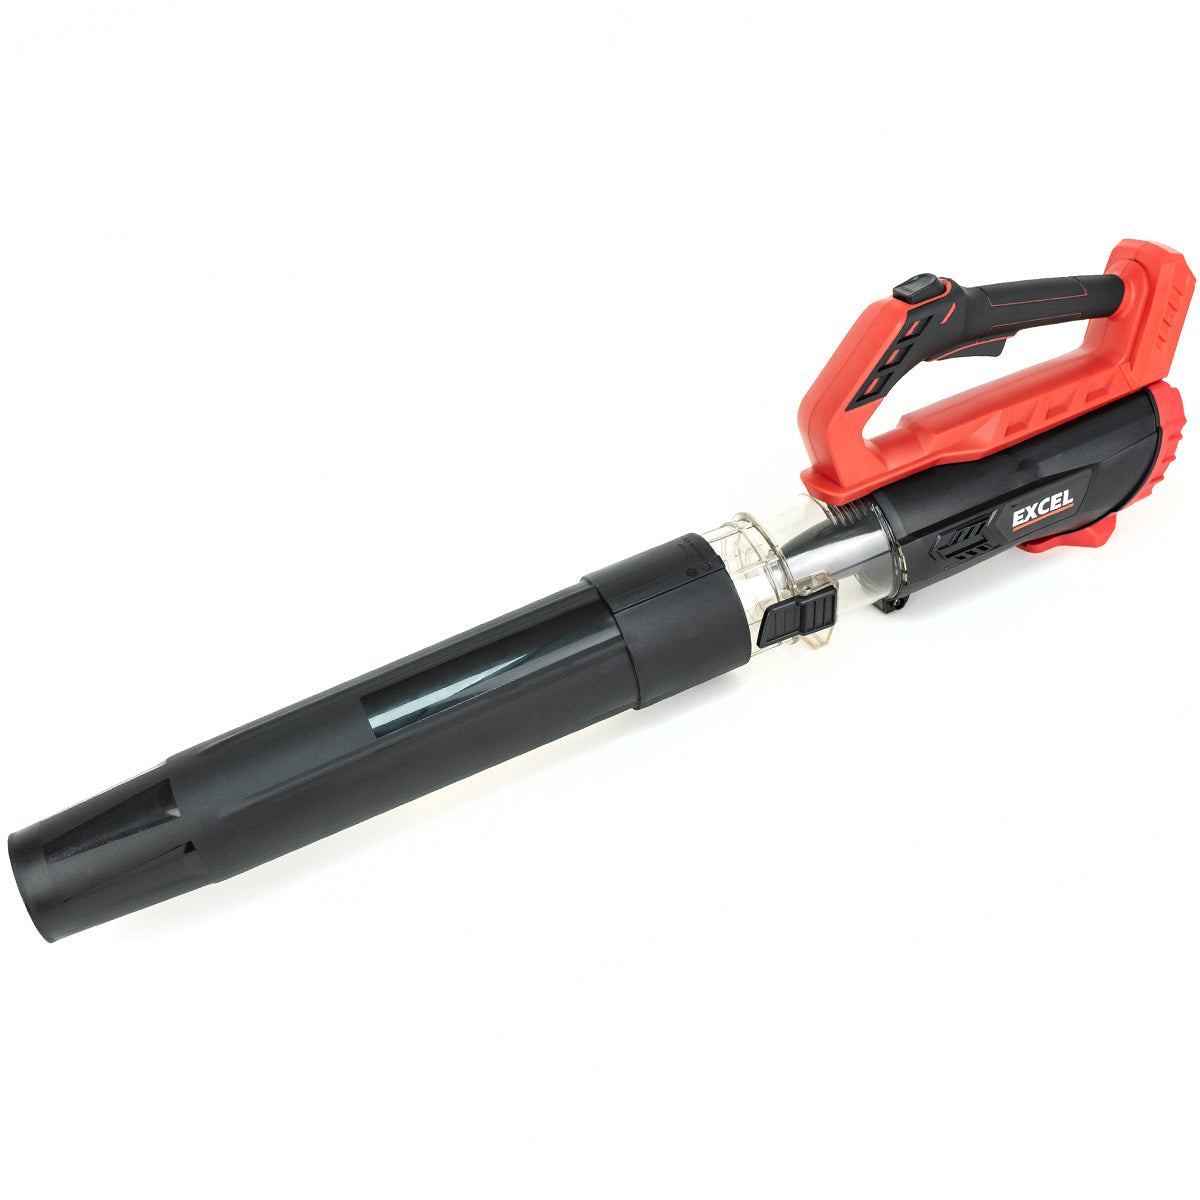 Excel 18V Cordless Garden Leaf Blower 2 Level Speed Body Only (No Battery & Charger)